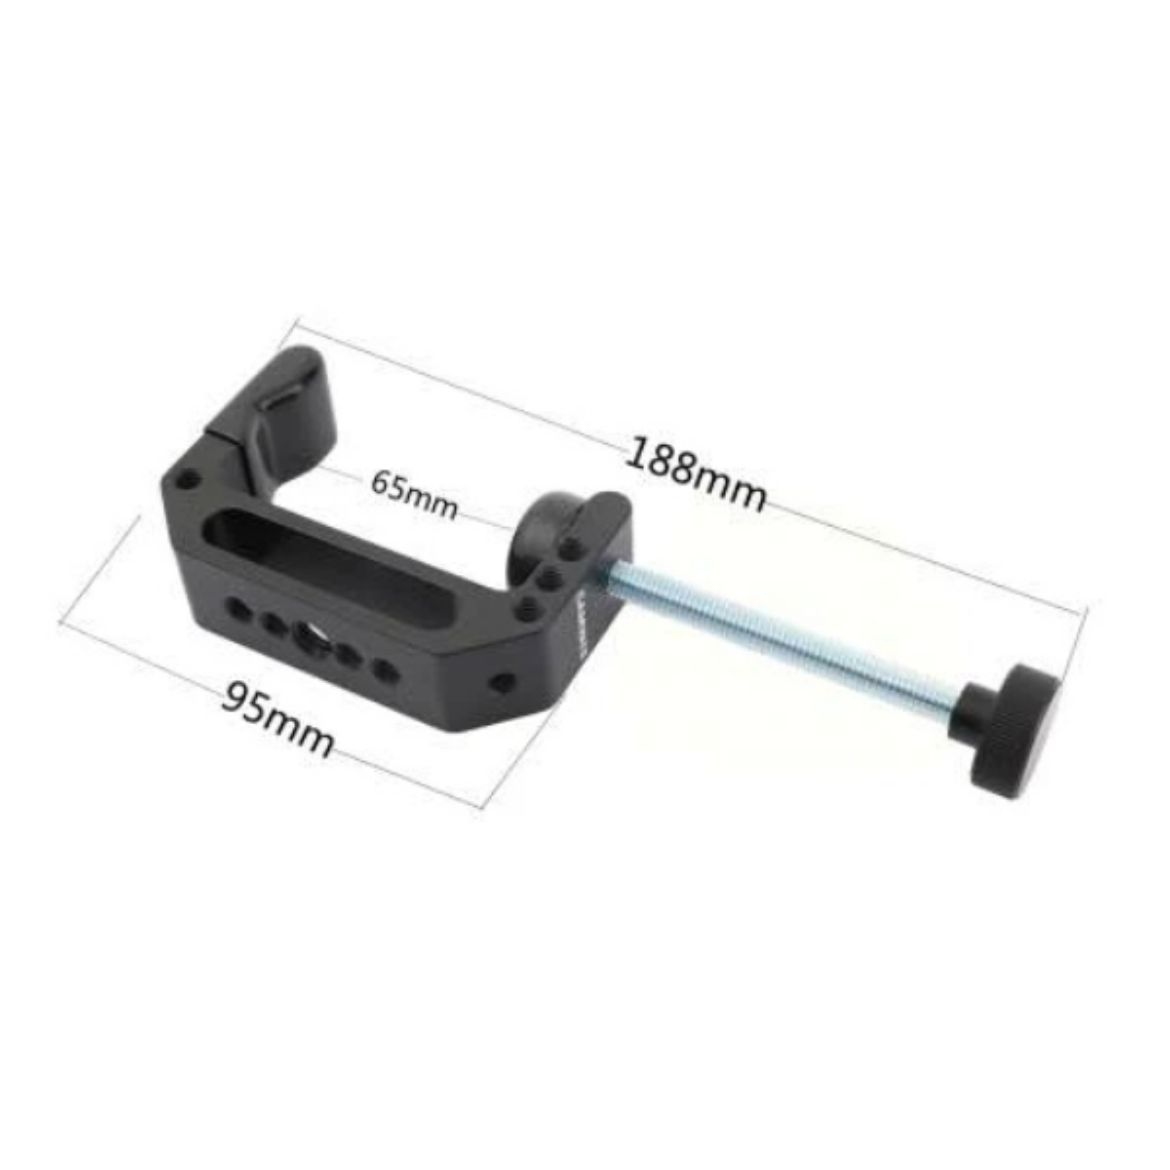 Picture of CLAMP - NINJA CLAMP UNIVERSAL C-CLAMP  (ALUMINIUM SUPPORT CLAMP & BALL HEAD ARM)